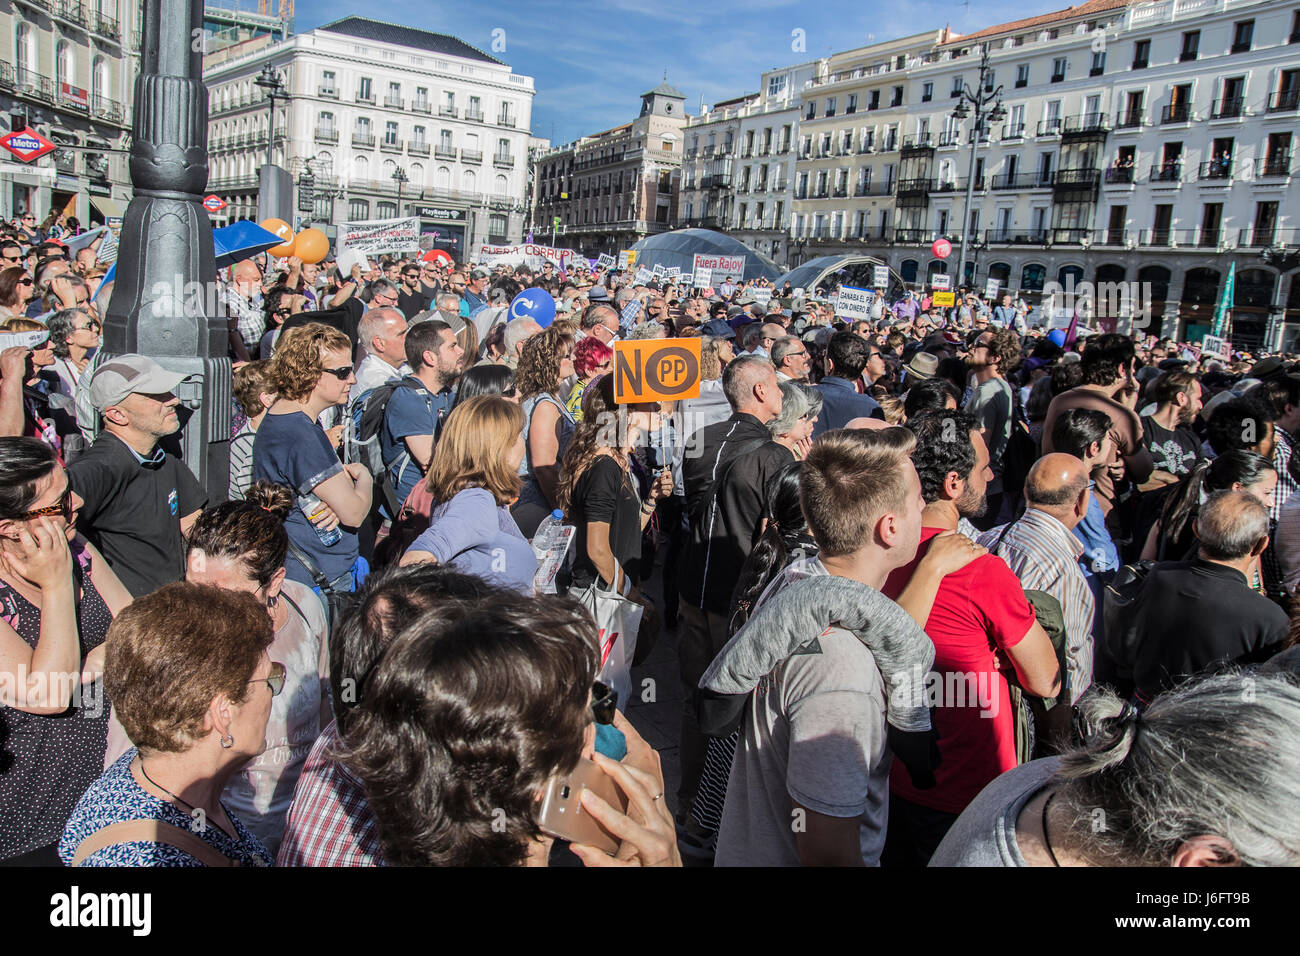 Madrid, Spain. 20th May, 2017. Demonstration in Madrid against the government of Popualr party onthe streets Credit: Alberto Sibaja Ramírez/Alamy Live News Stock Photo